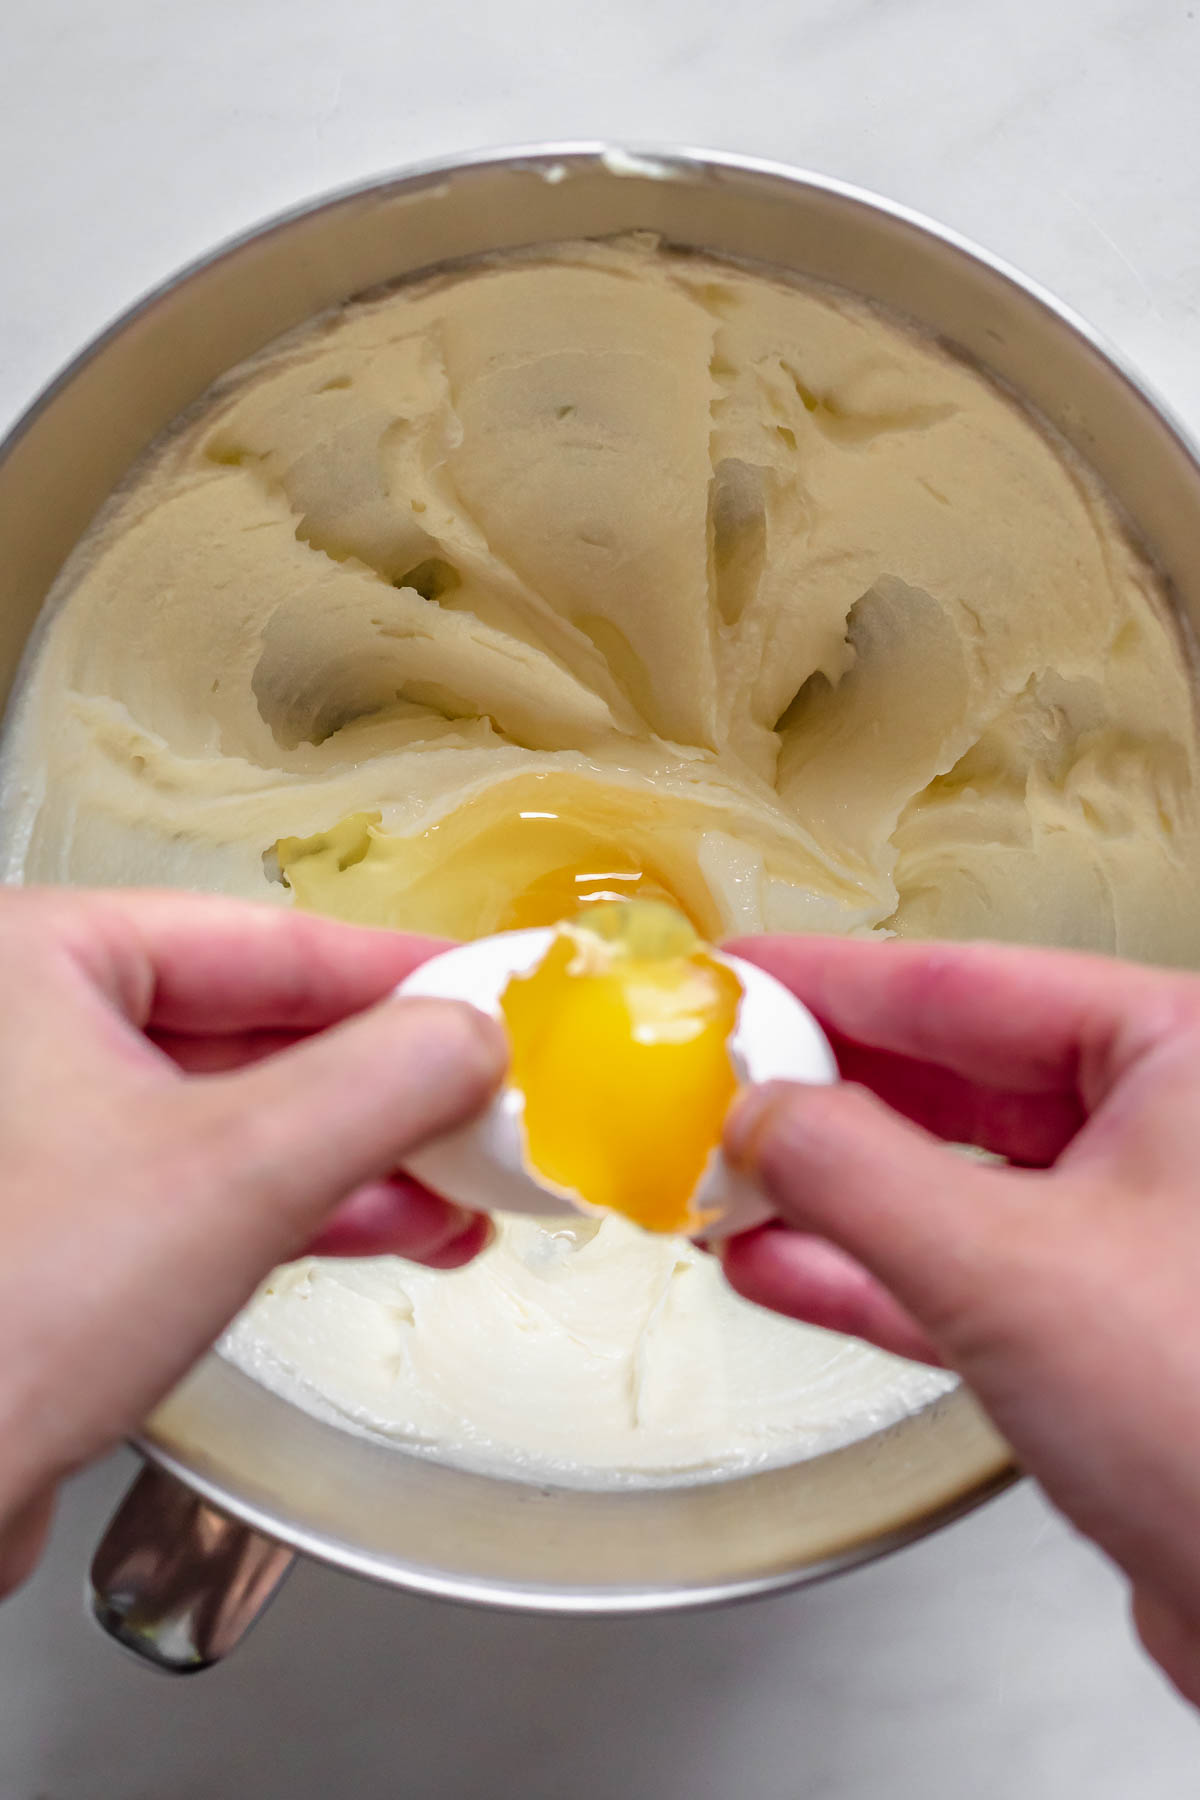 An egg cracking into a bowl of mixed butter.